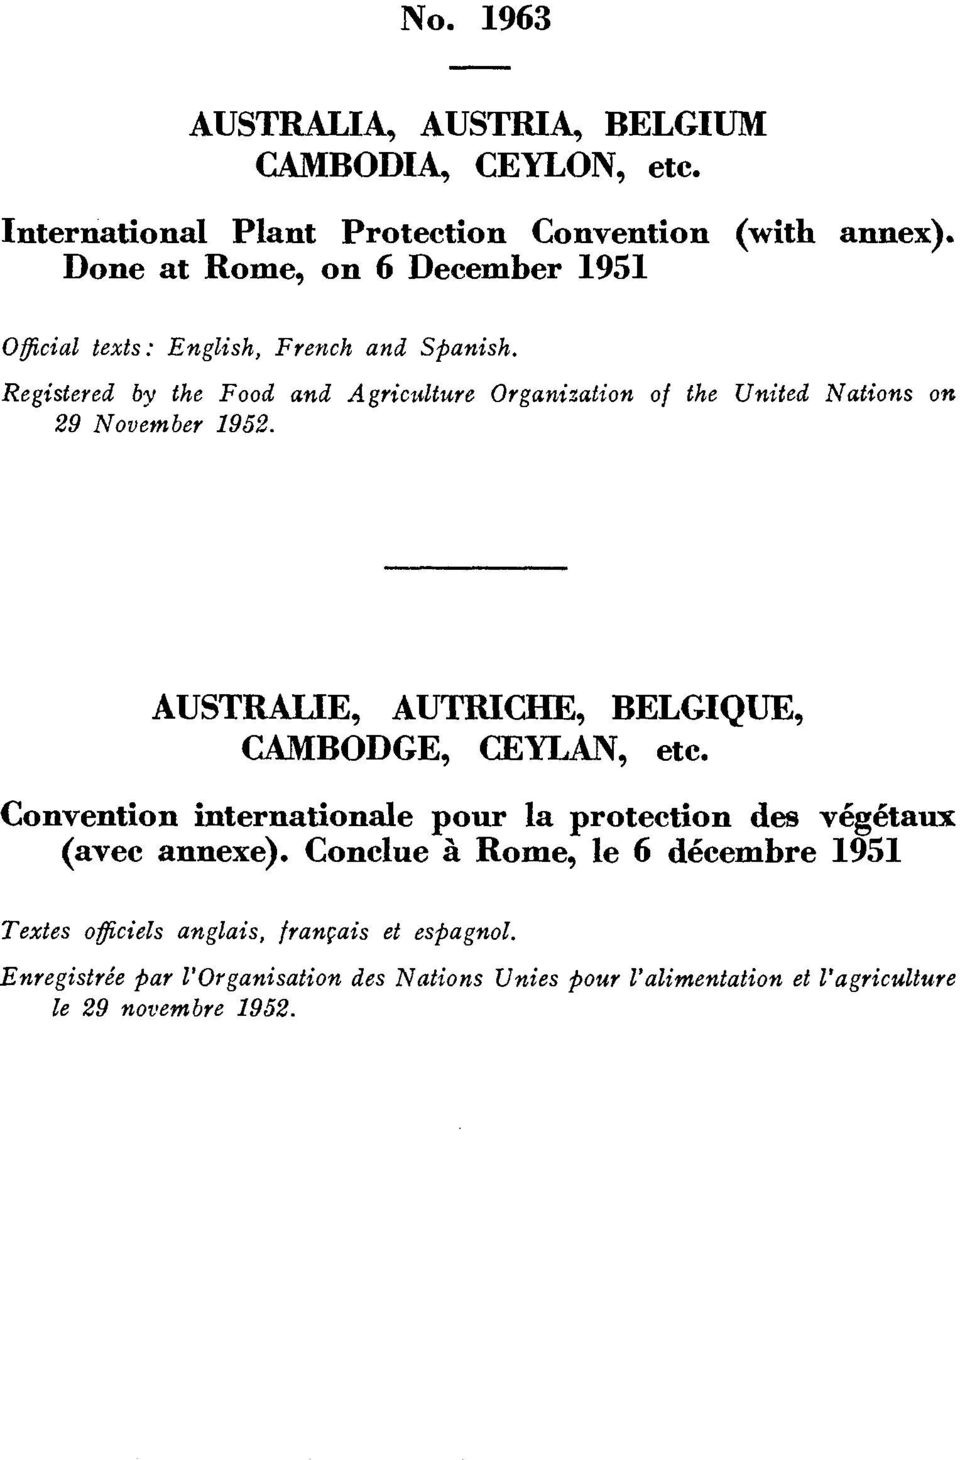 Registered by the Food and Agriculture Organization of the United Nations on 29 November 1952. AUSTRALIE, AUTRICHE, BELGIQUE, CAMBODGE, CEYLAN, etc.